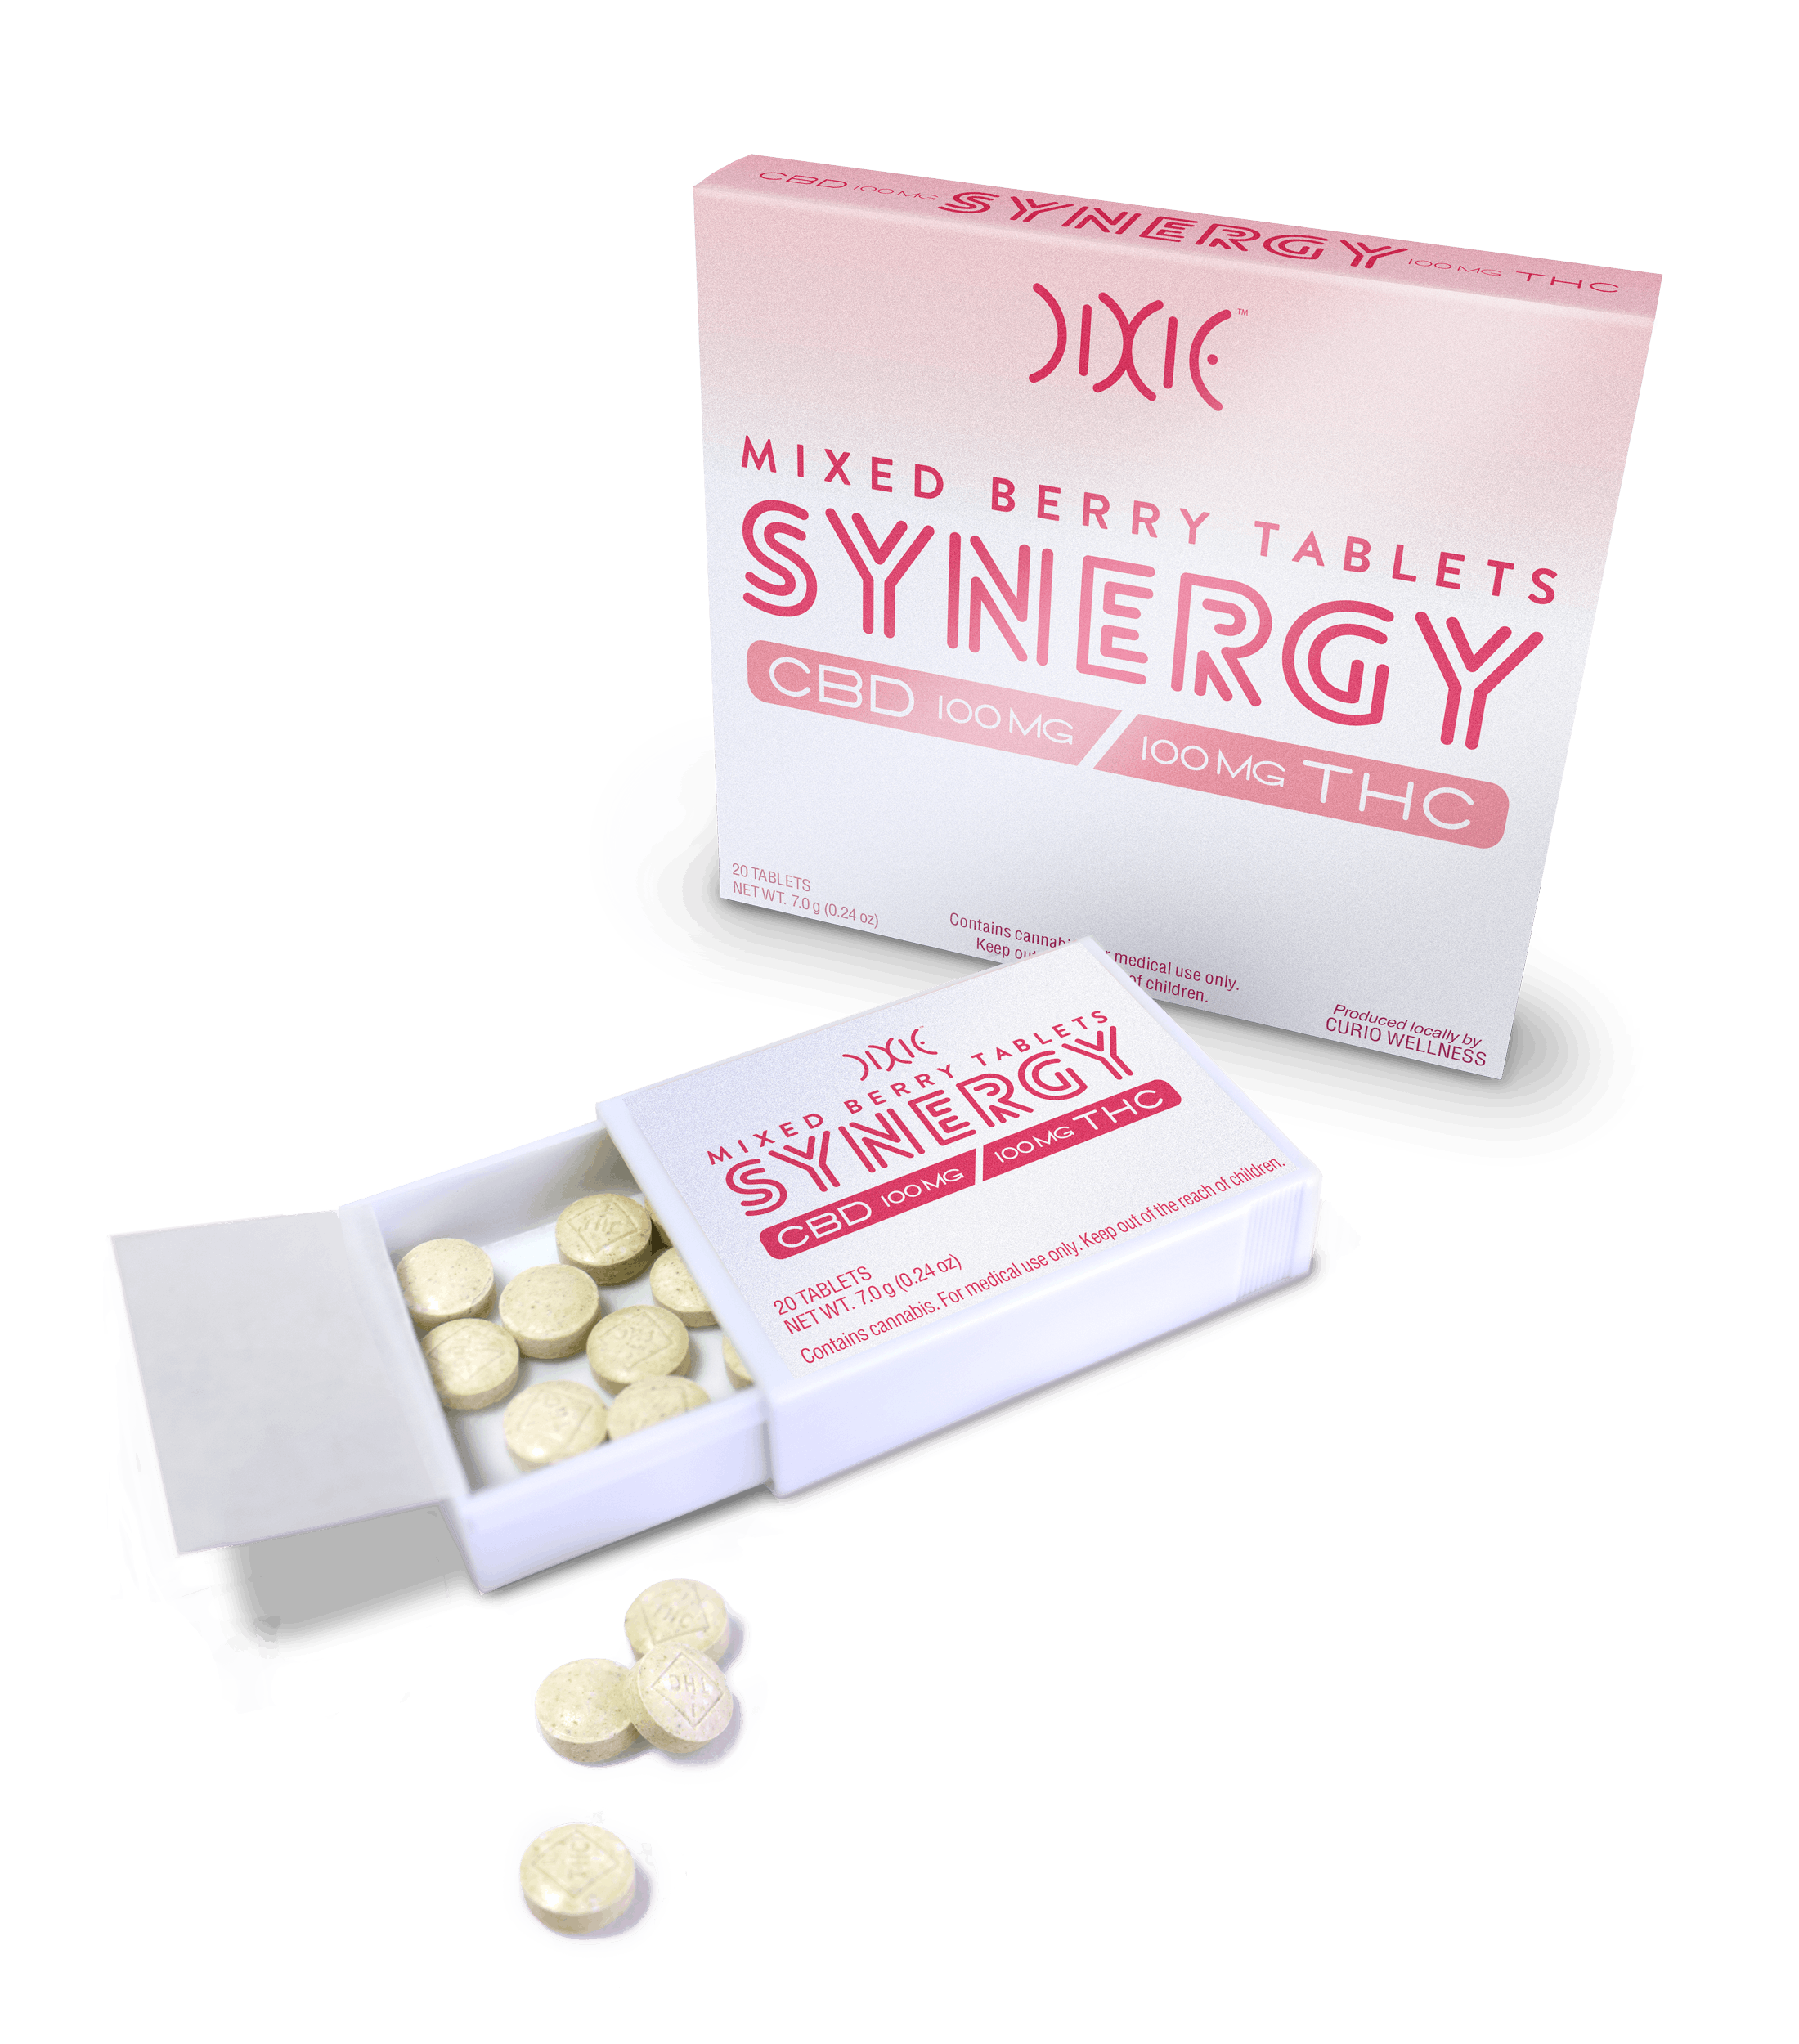 edible-dixie-synergy-tablets-mixed-berry